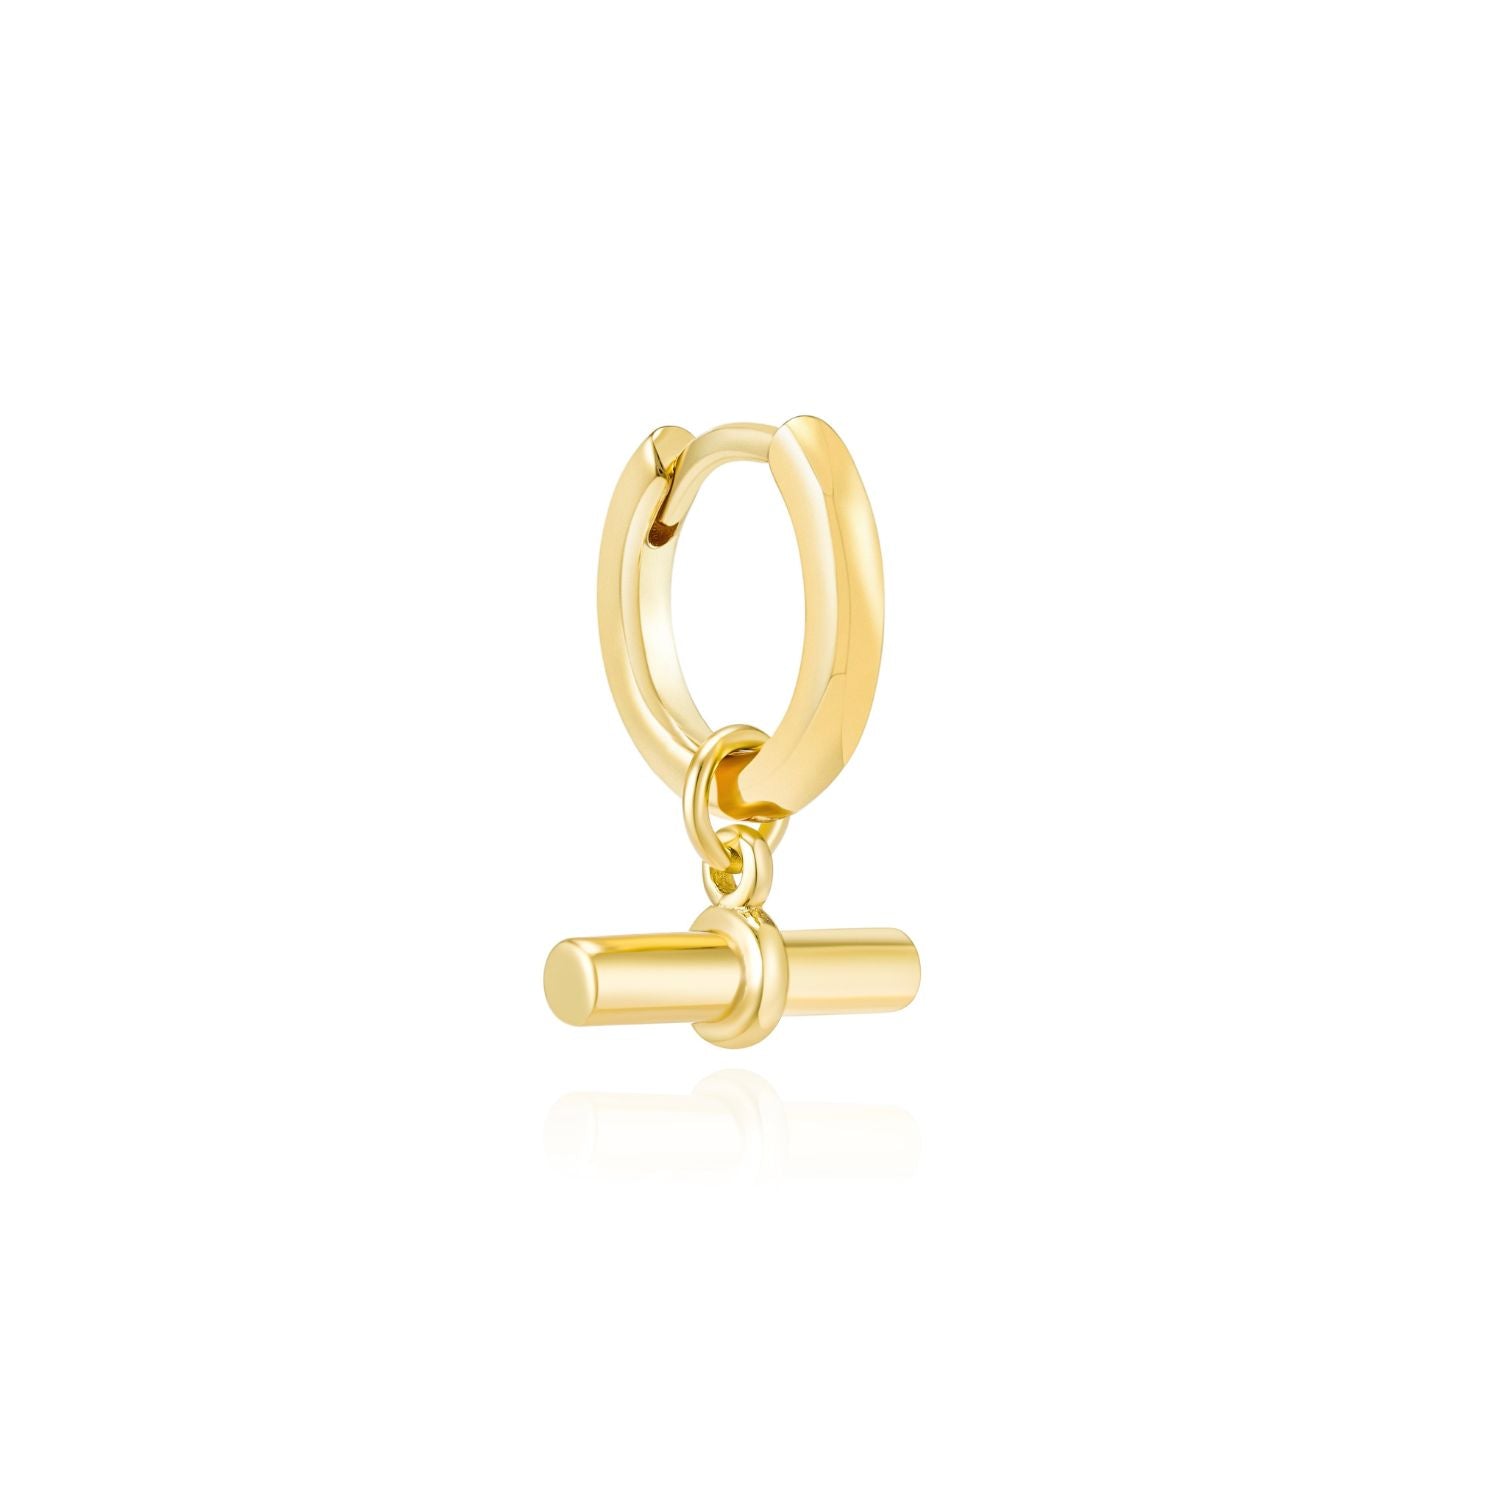 Kleio single yellow gold plated scroll charm - Helix & Conch